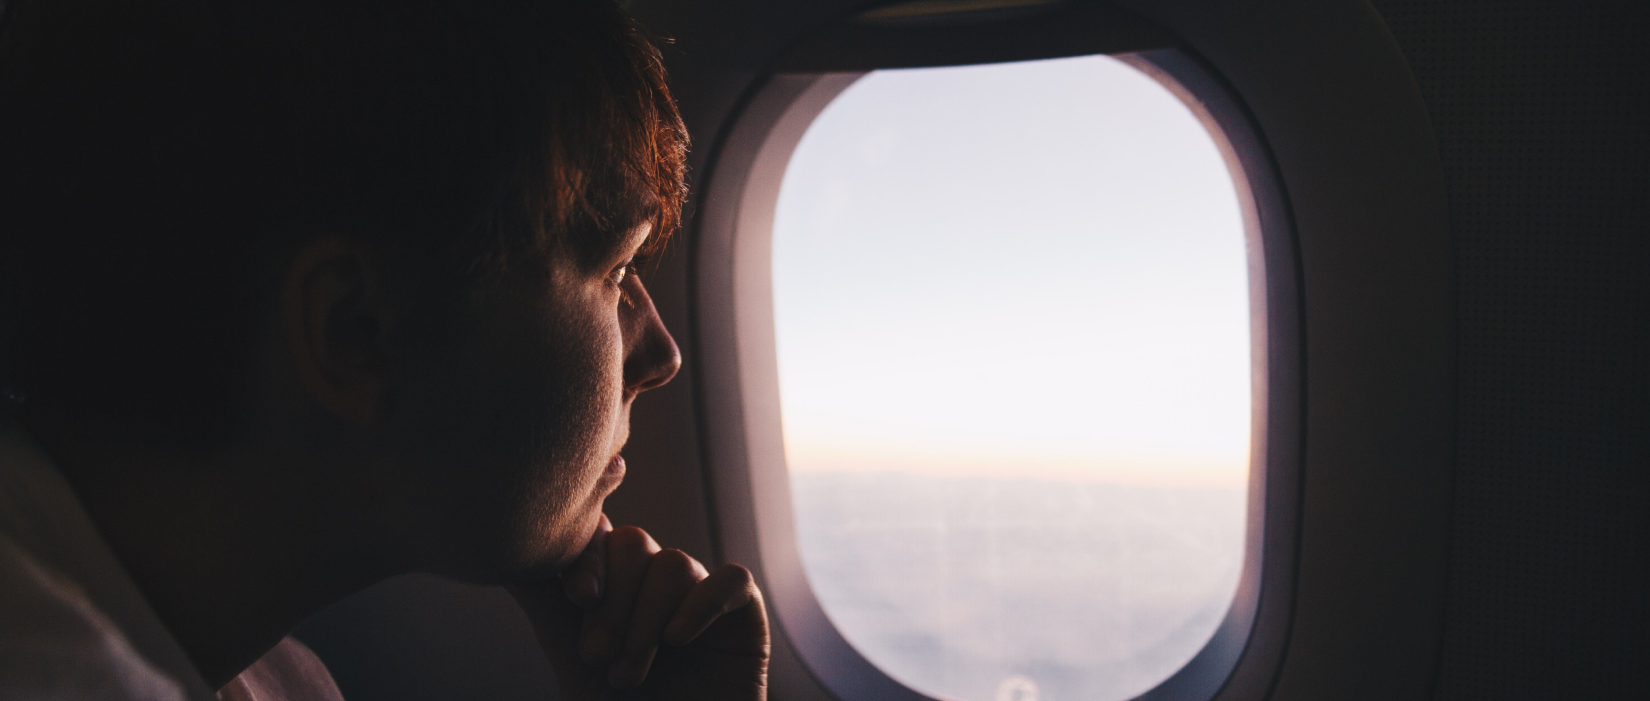 person looking out an airplane window